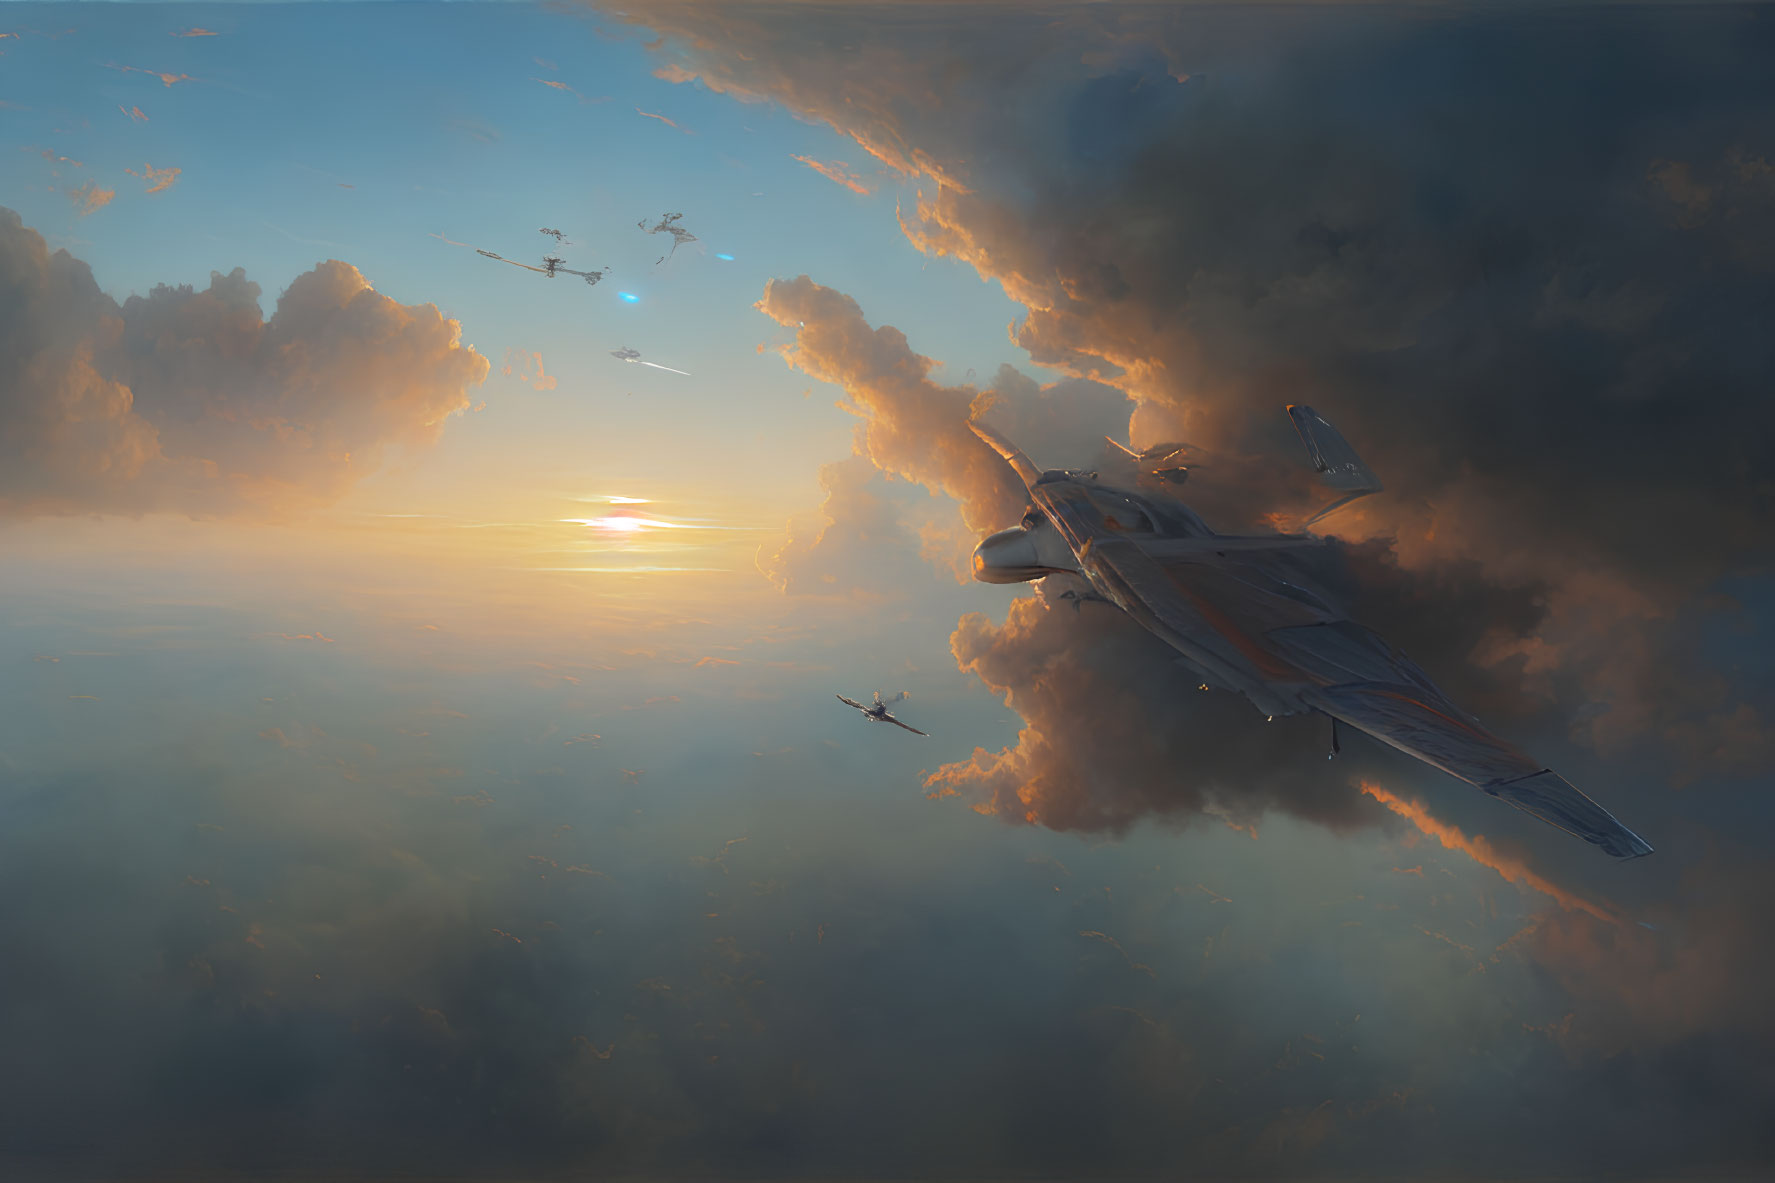 Dramatic sunset sky with futuristic aircraft flying high.